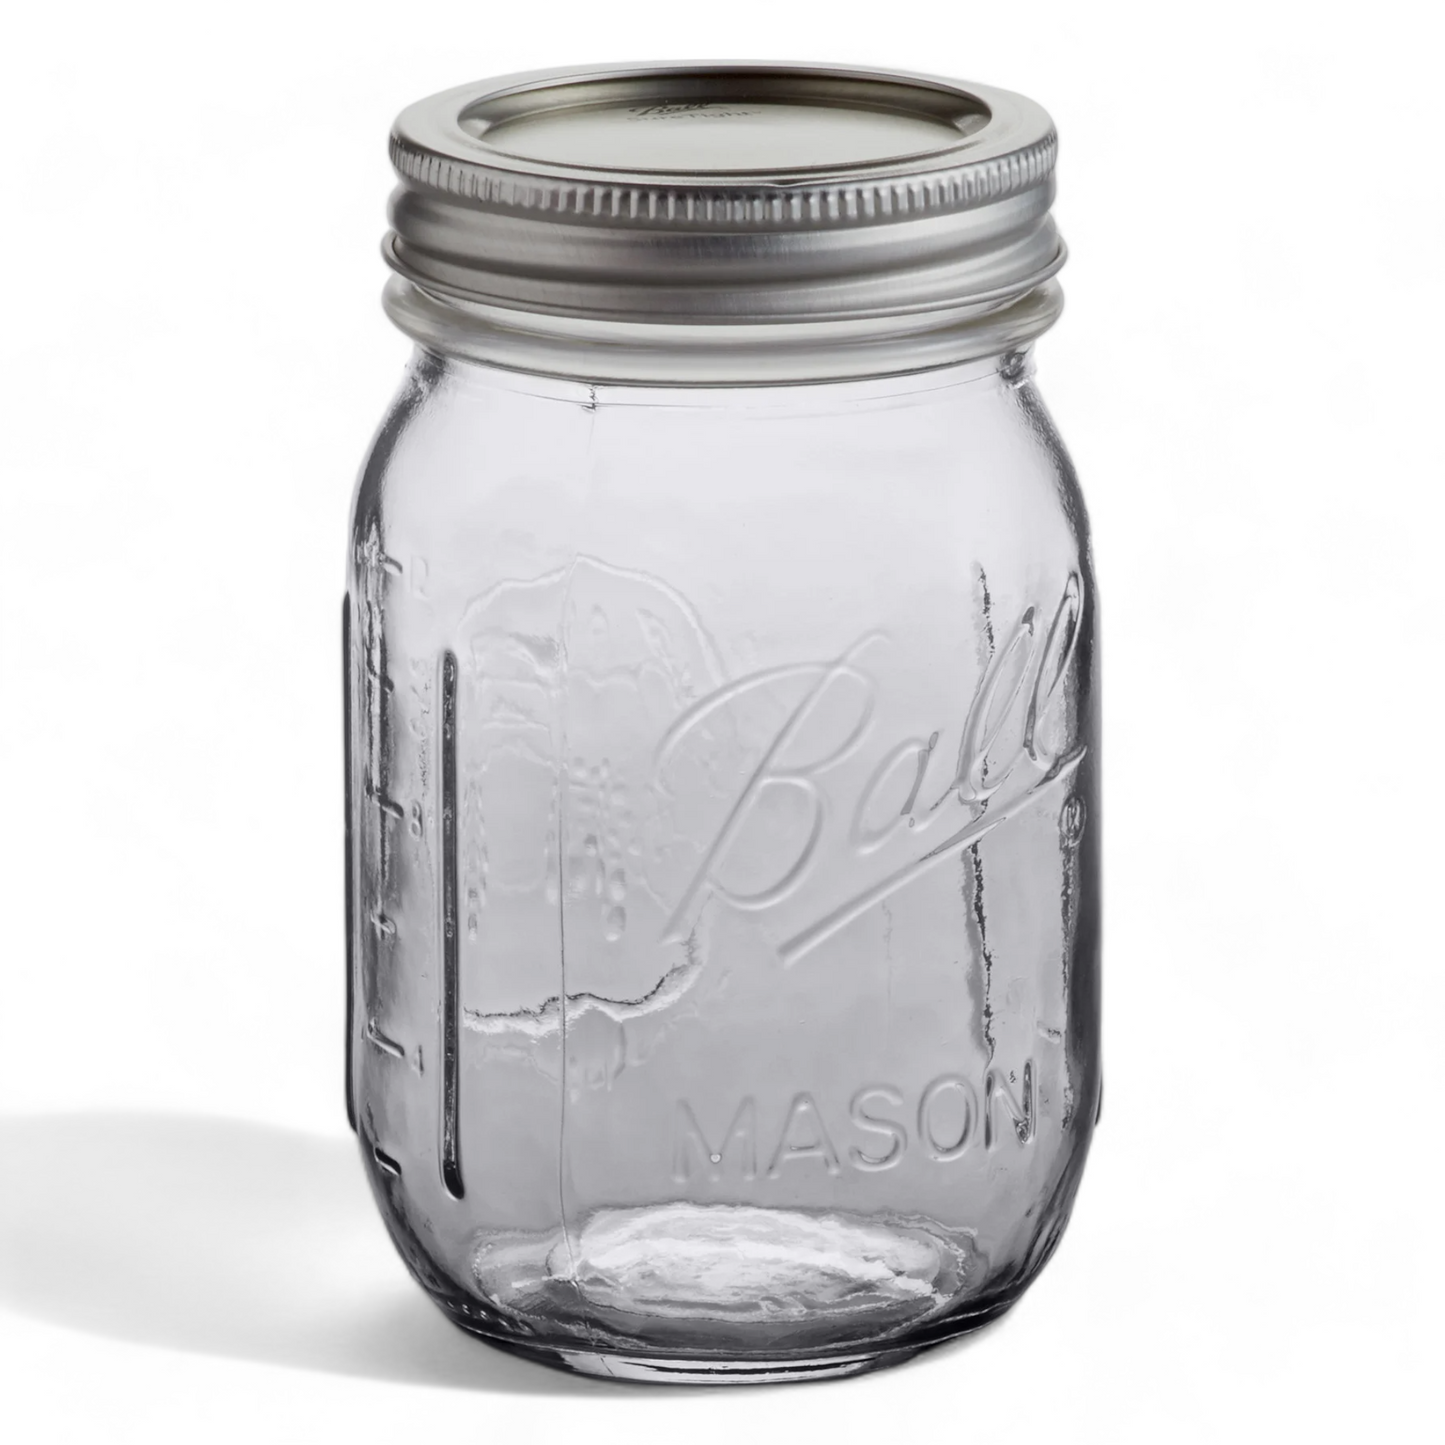 A standard Ball mason jar with a metal lid and measuring levels showing